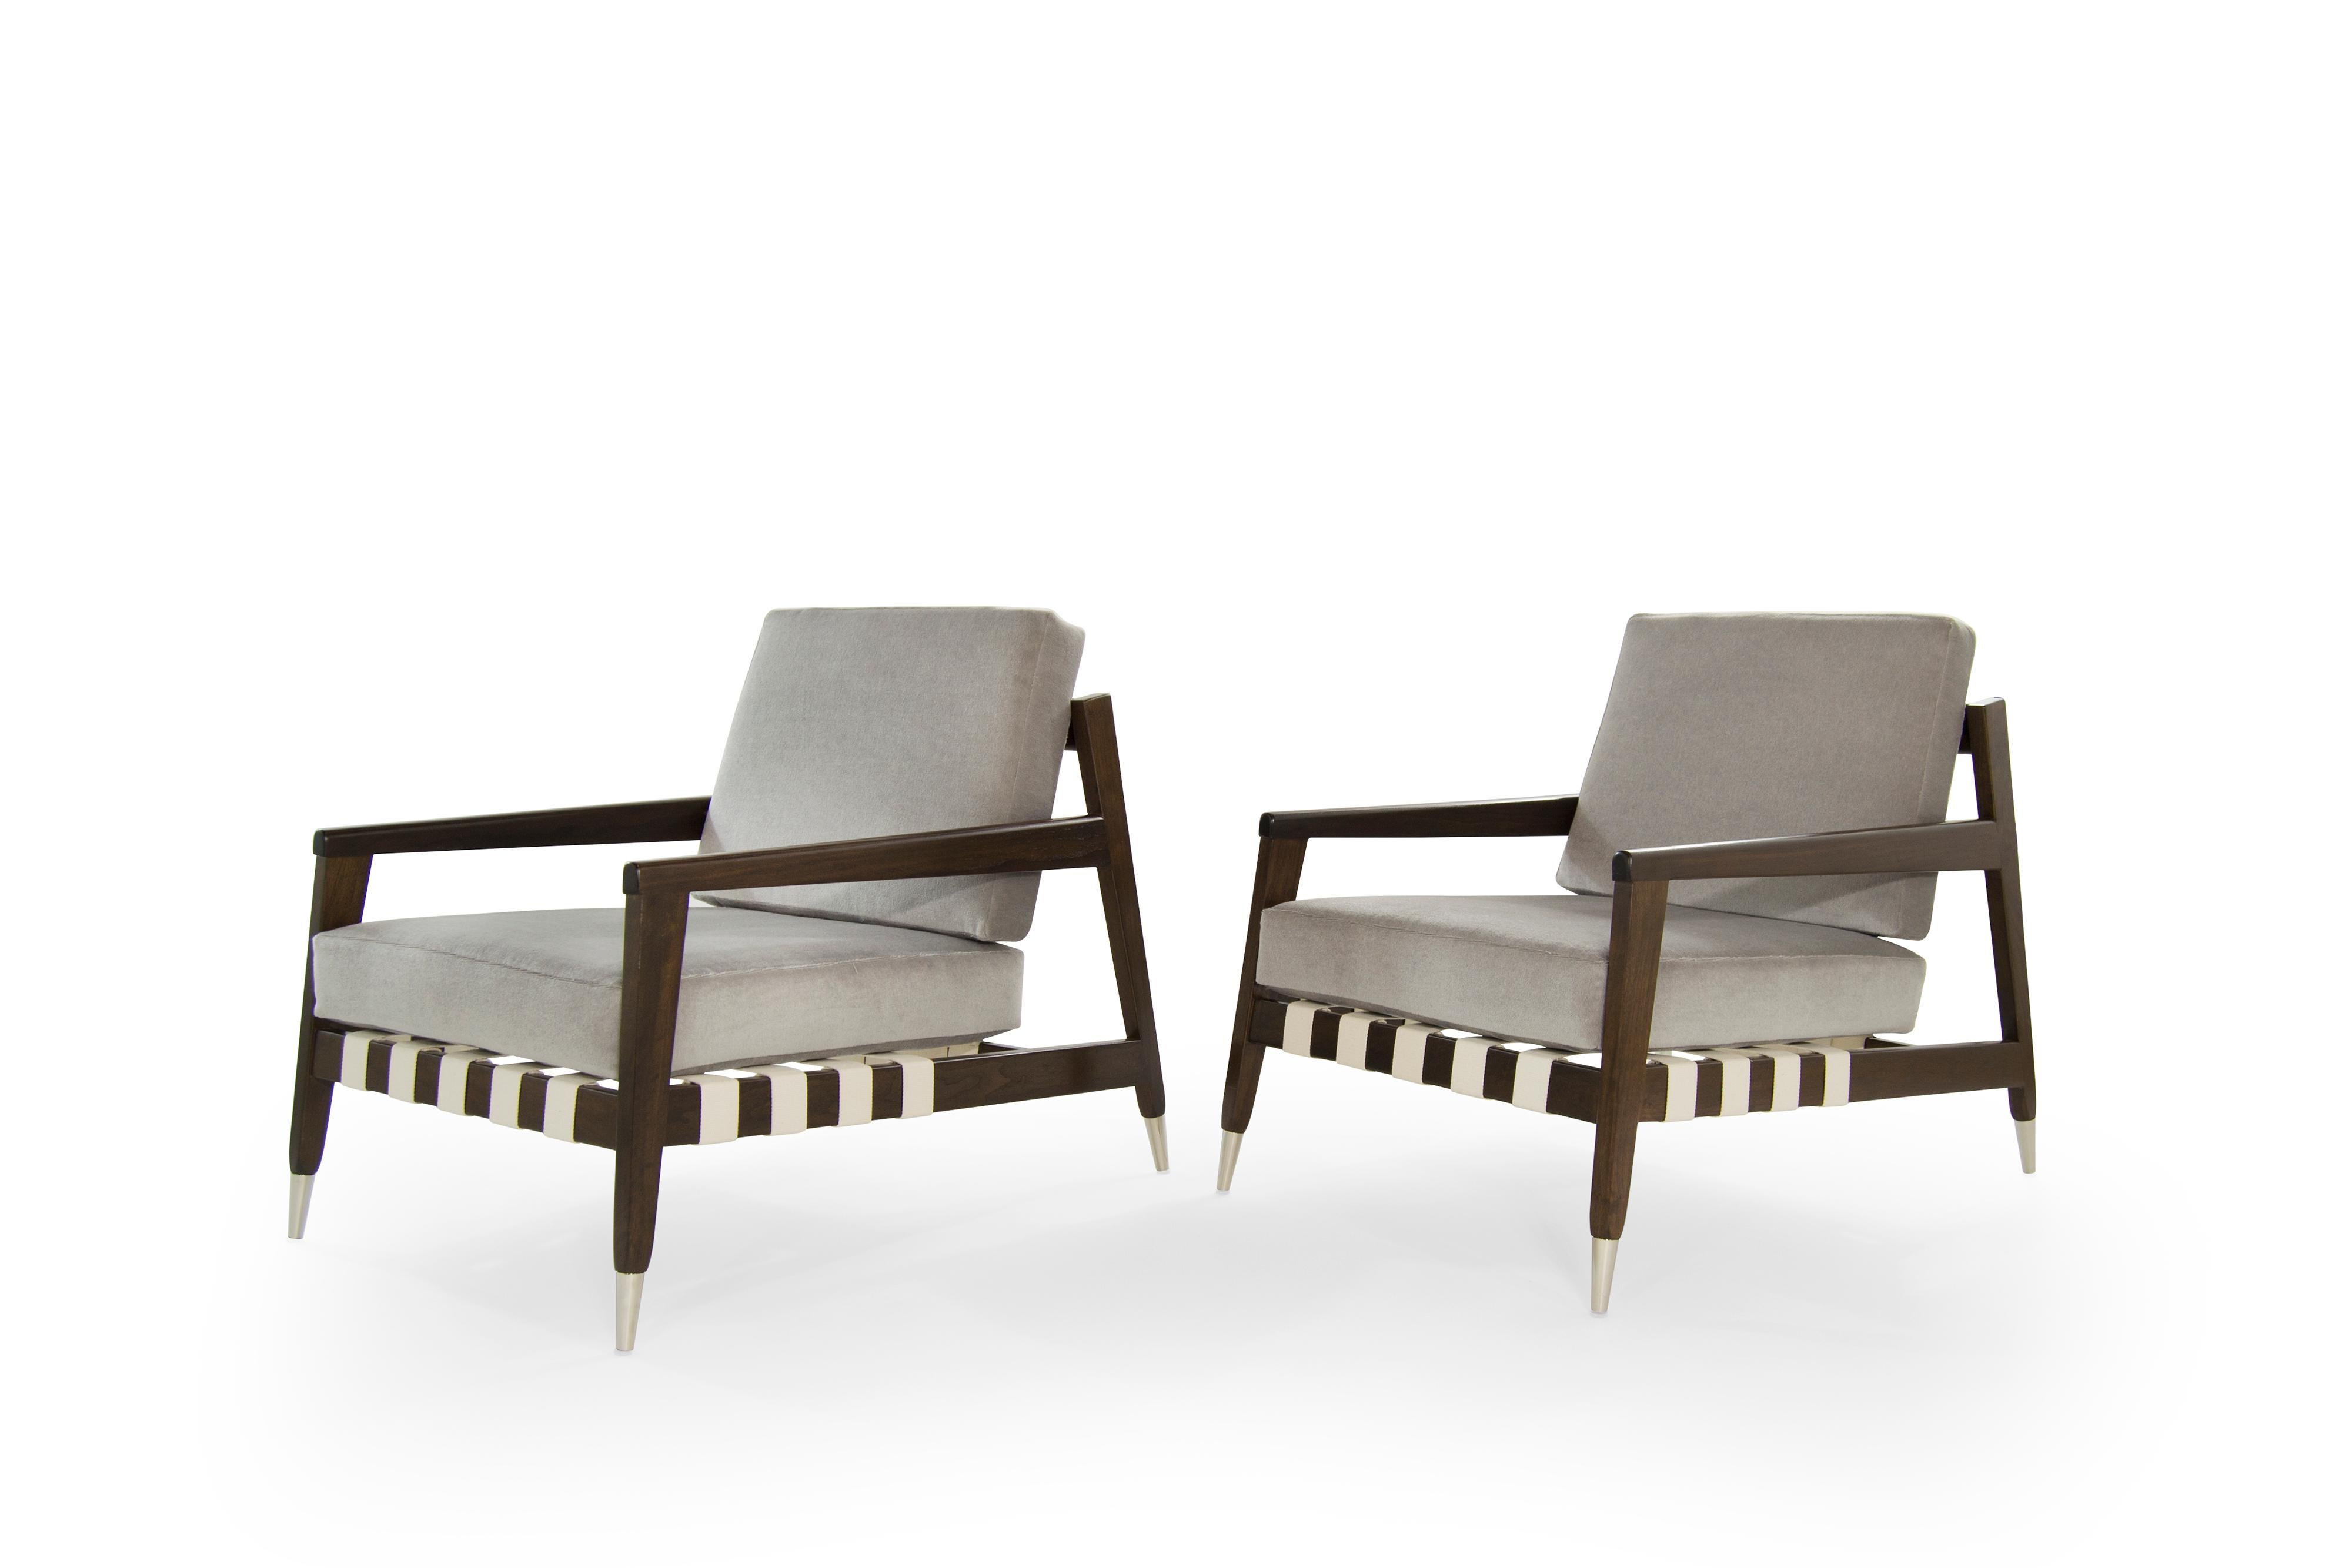 American Rare Edmond Spence Strapped Lounge Chairs, 1950s